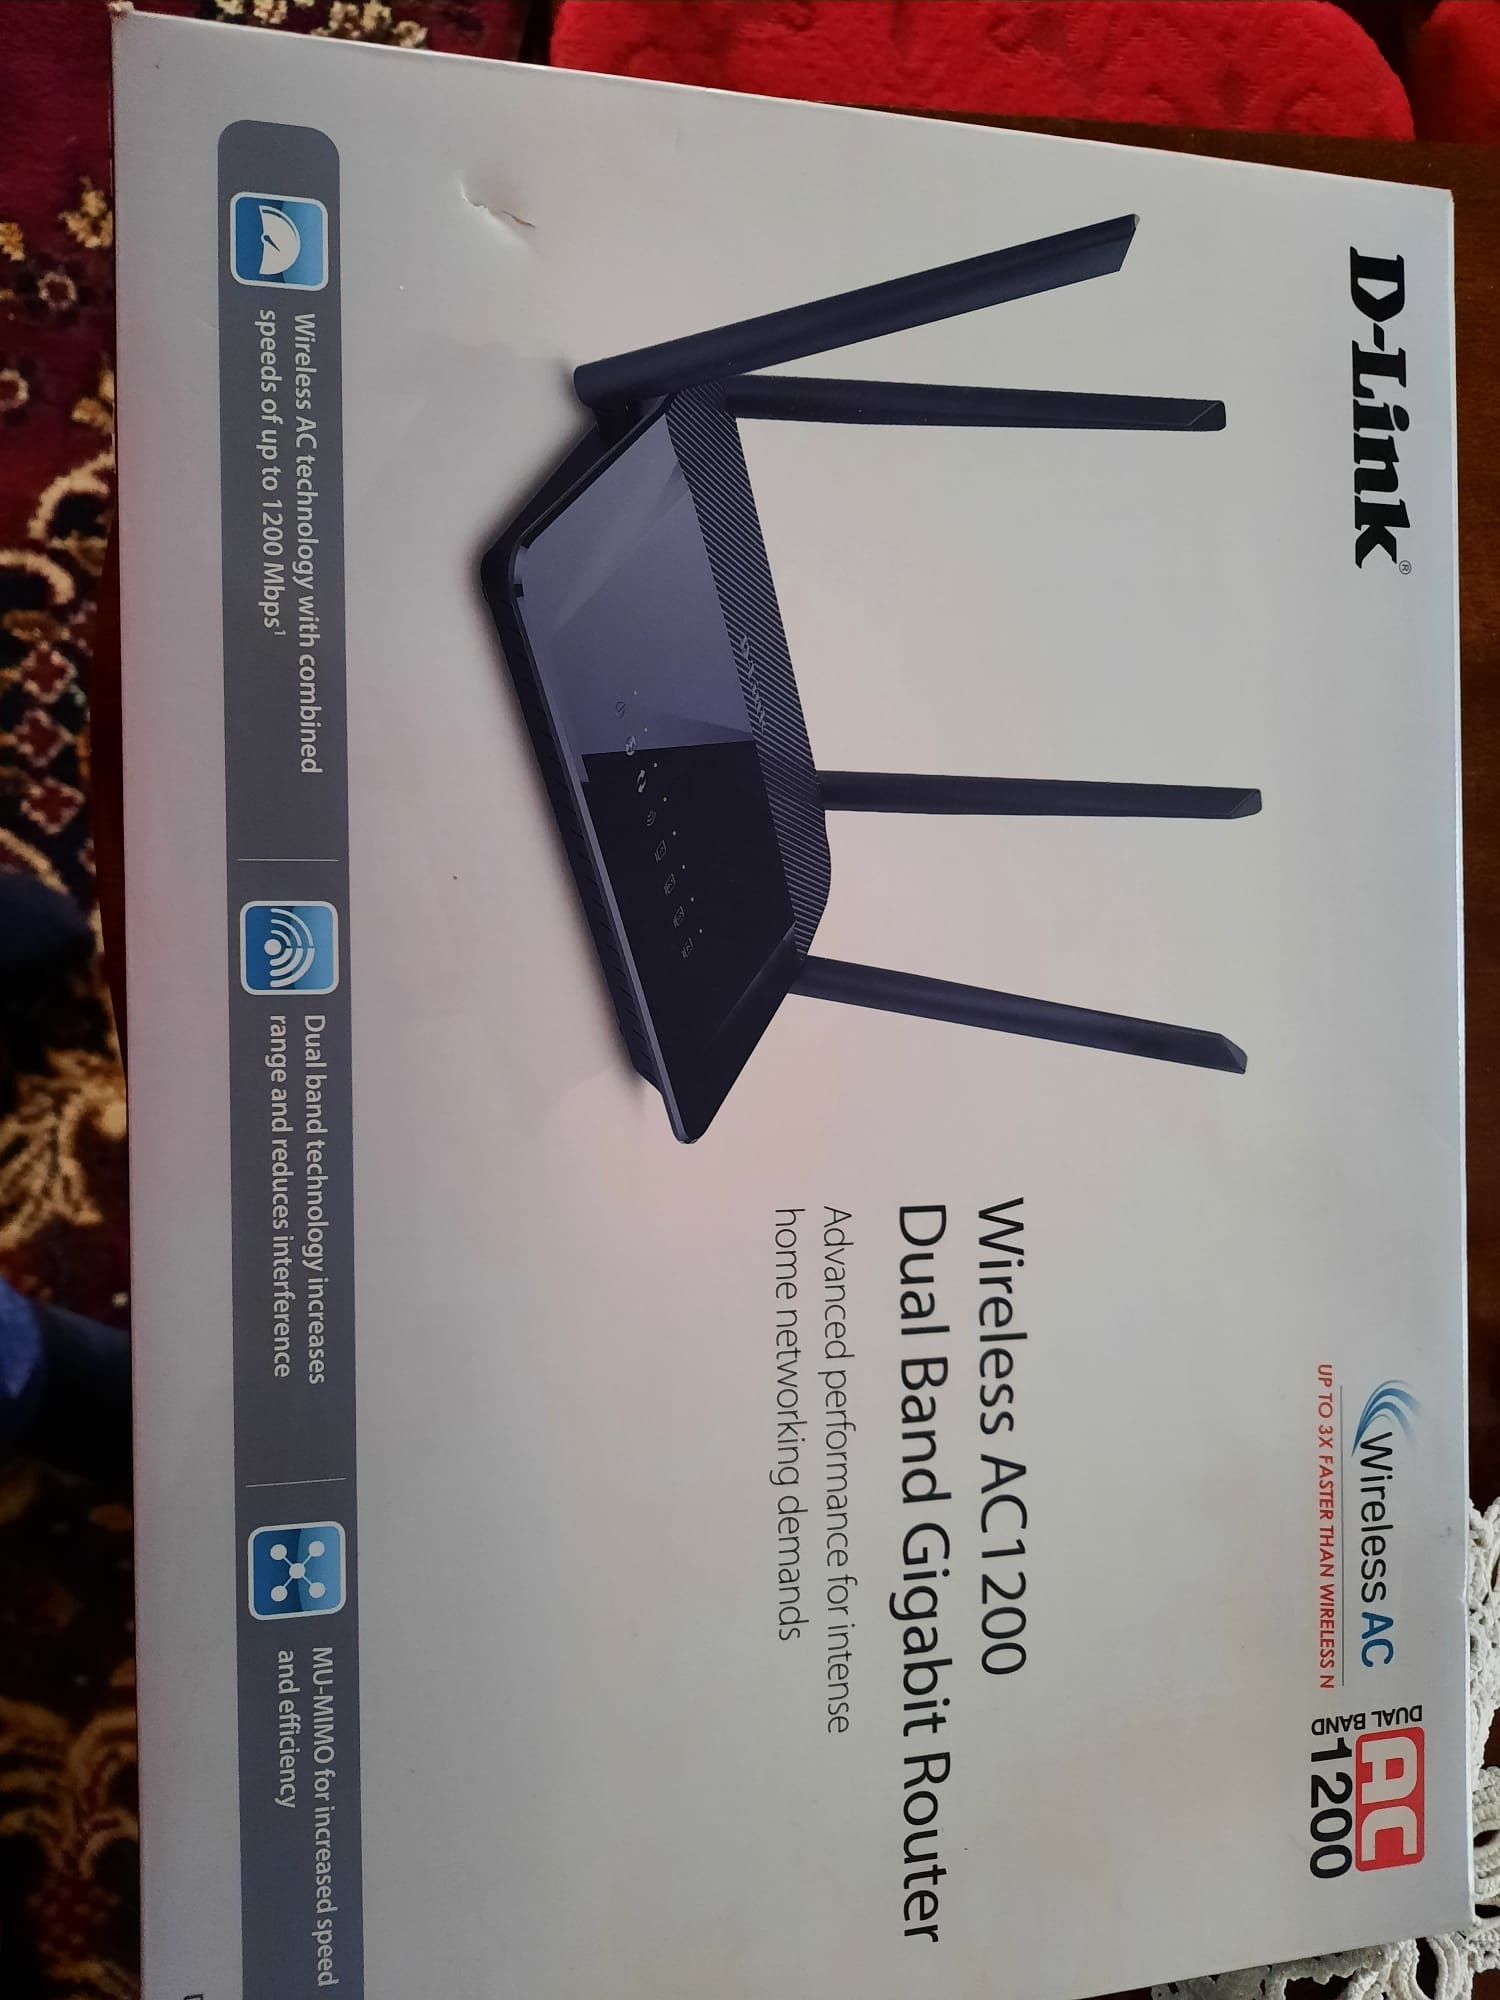 Vand router D-link AC 1200